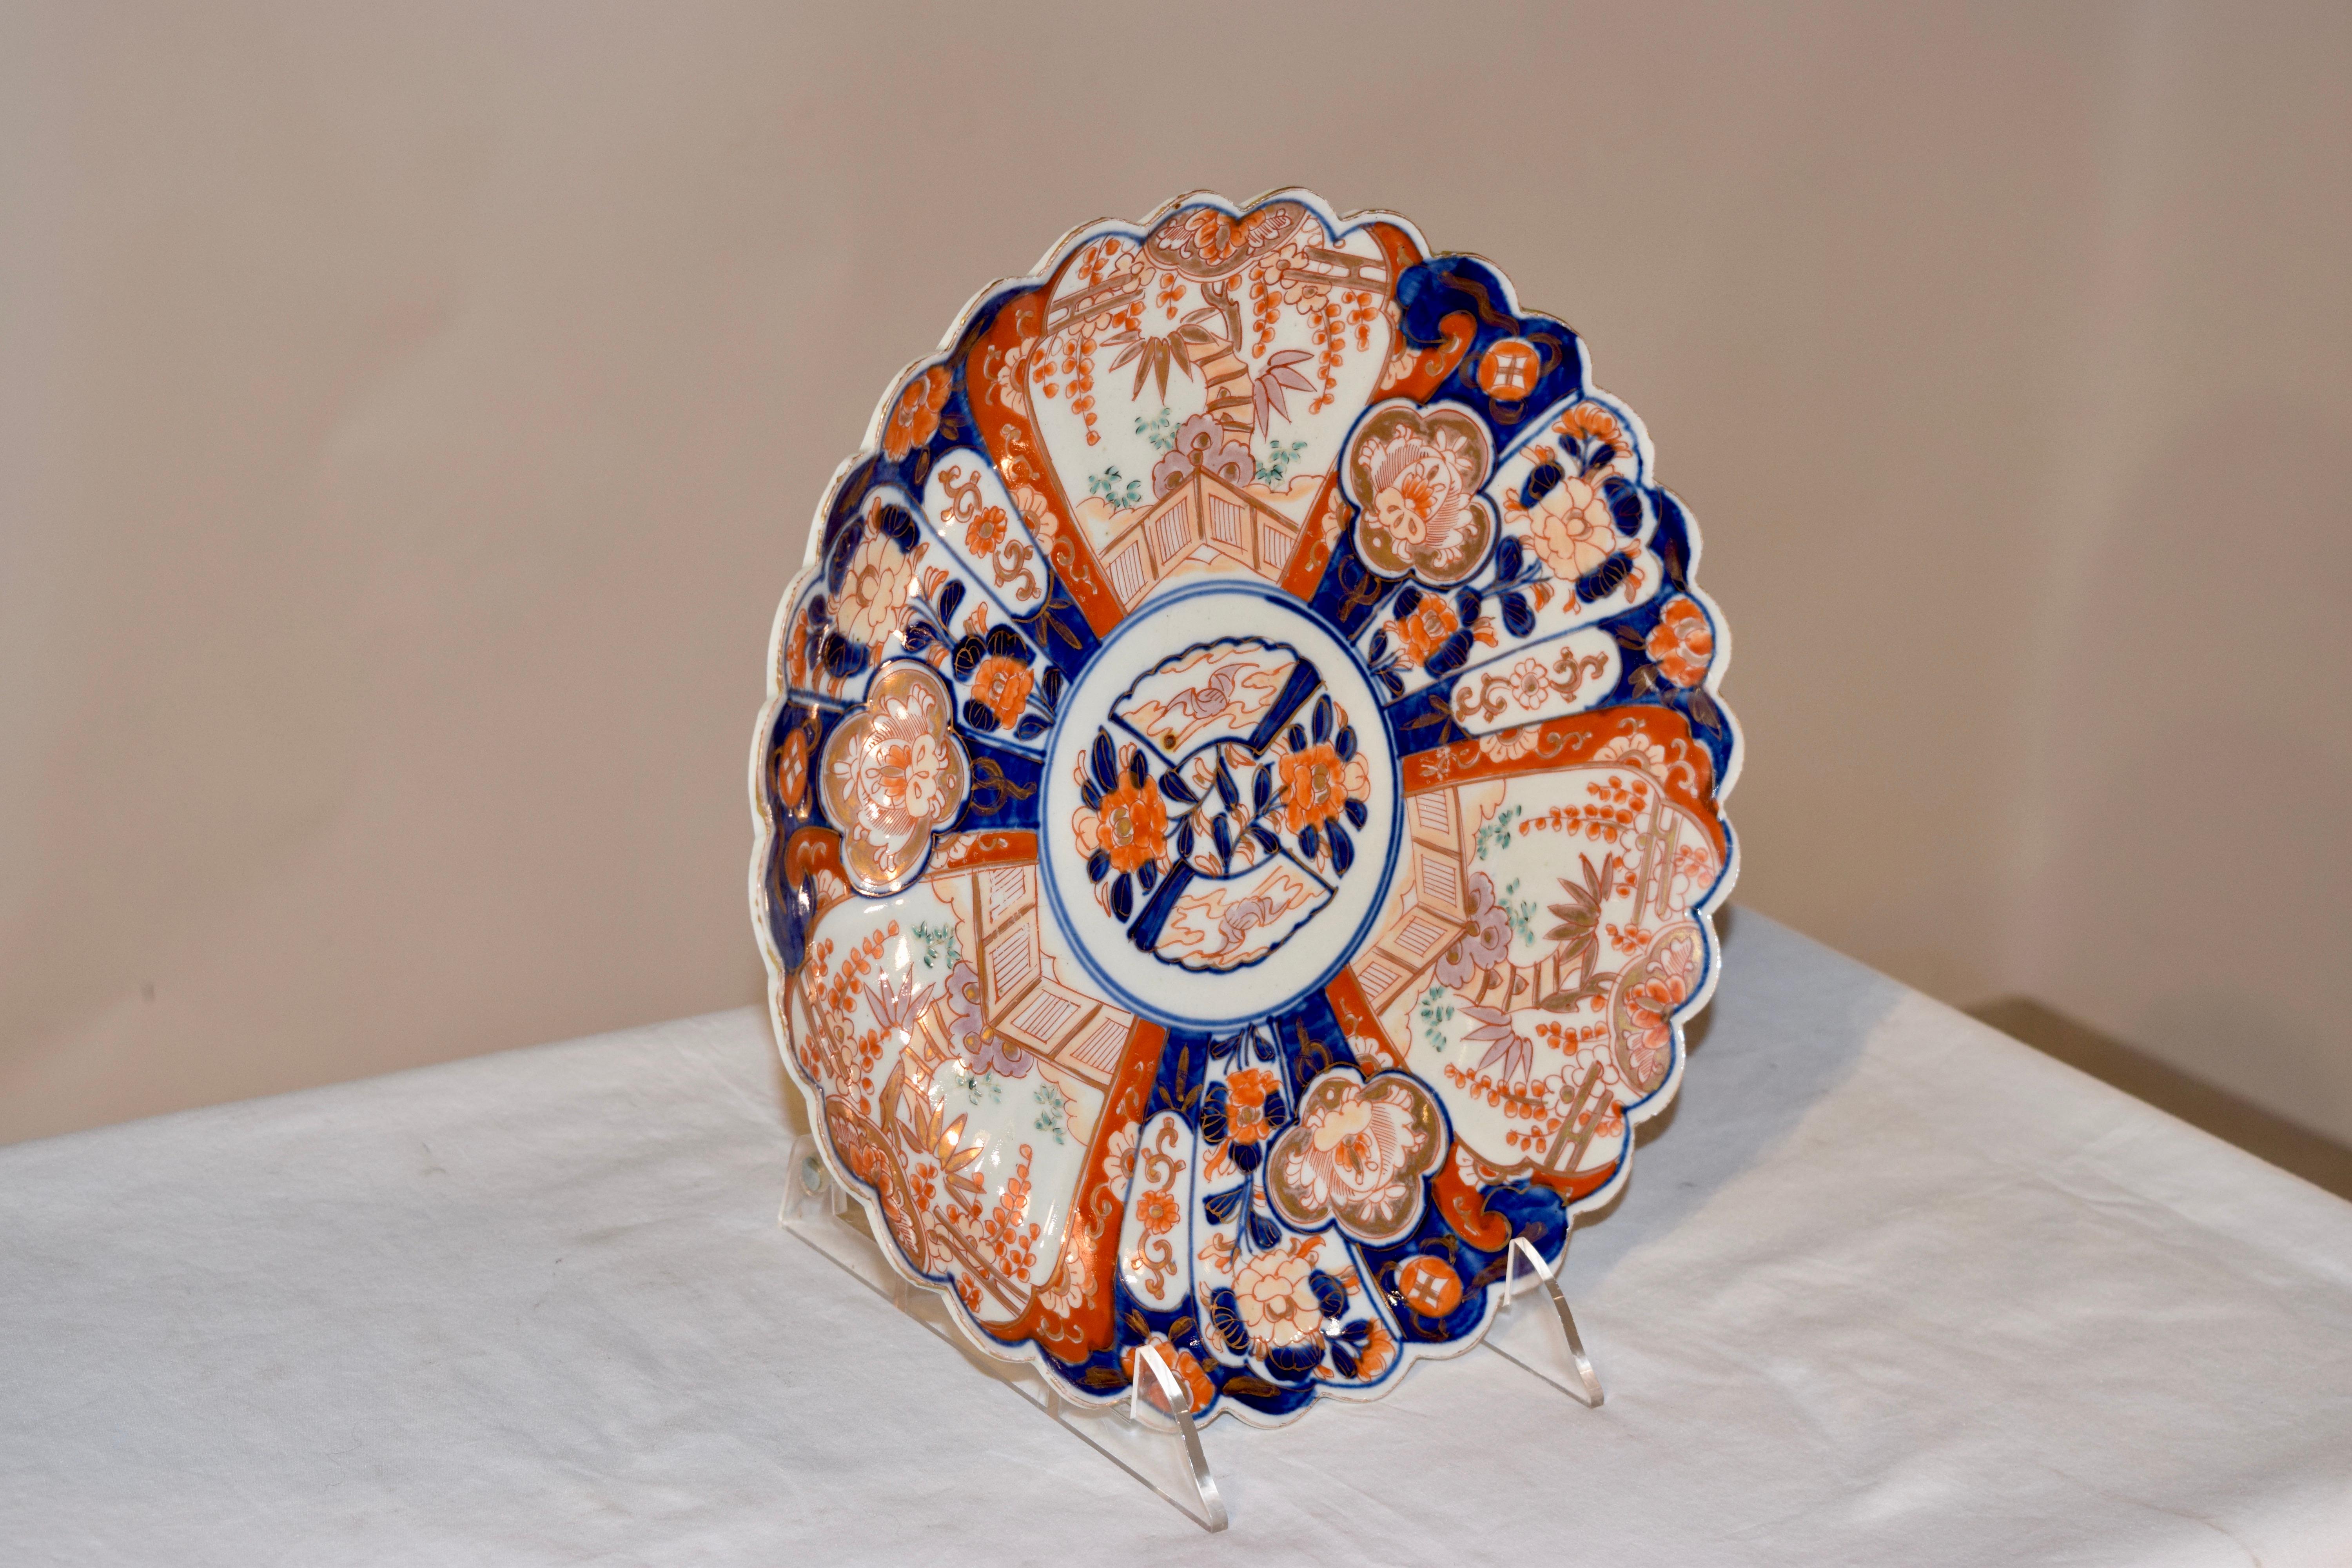 19th century Imari charger from Japan with a central medallion containing a hand polychromed floral design, surrounded by a fan design, all containing patterns alternating with florals and garden scenes.